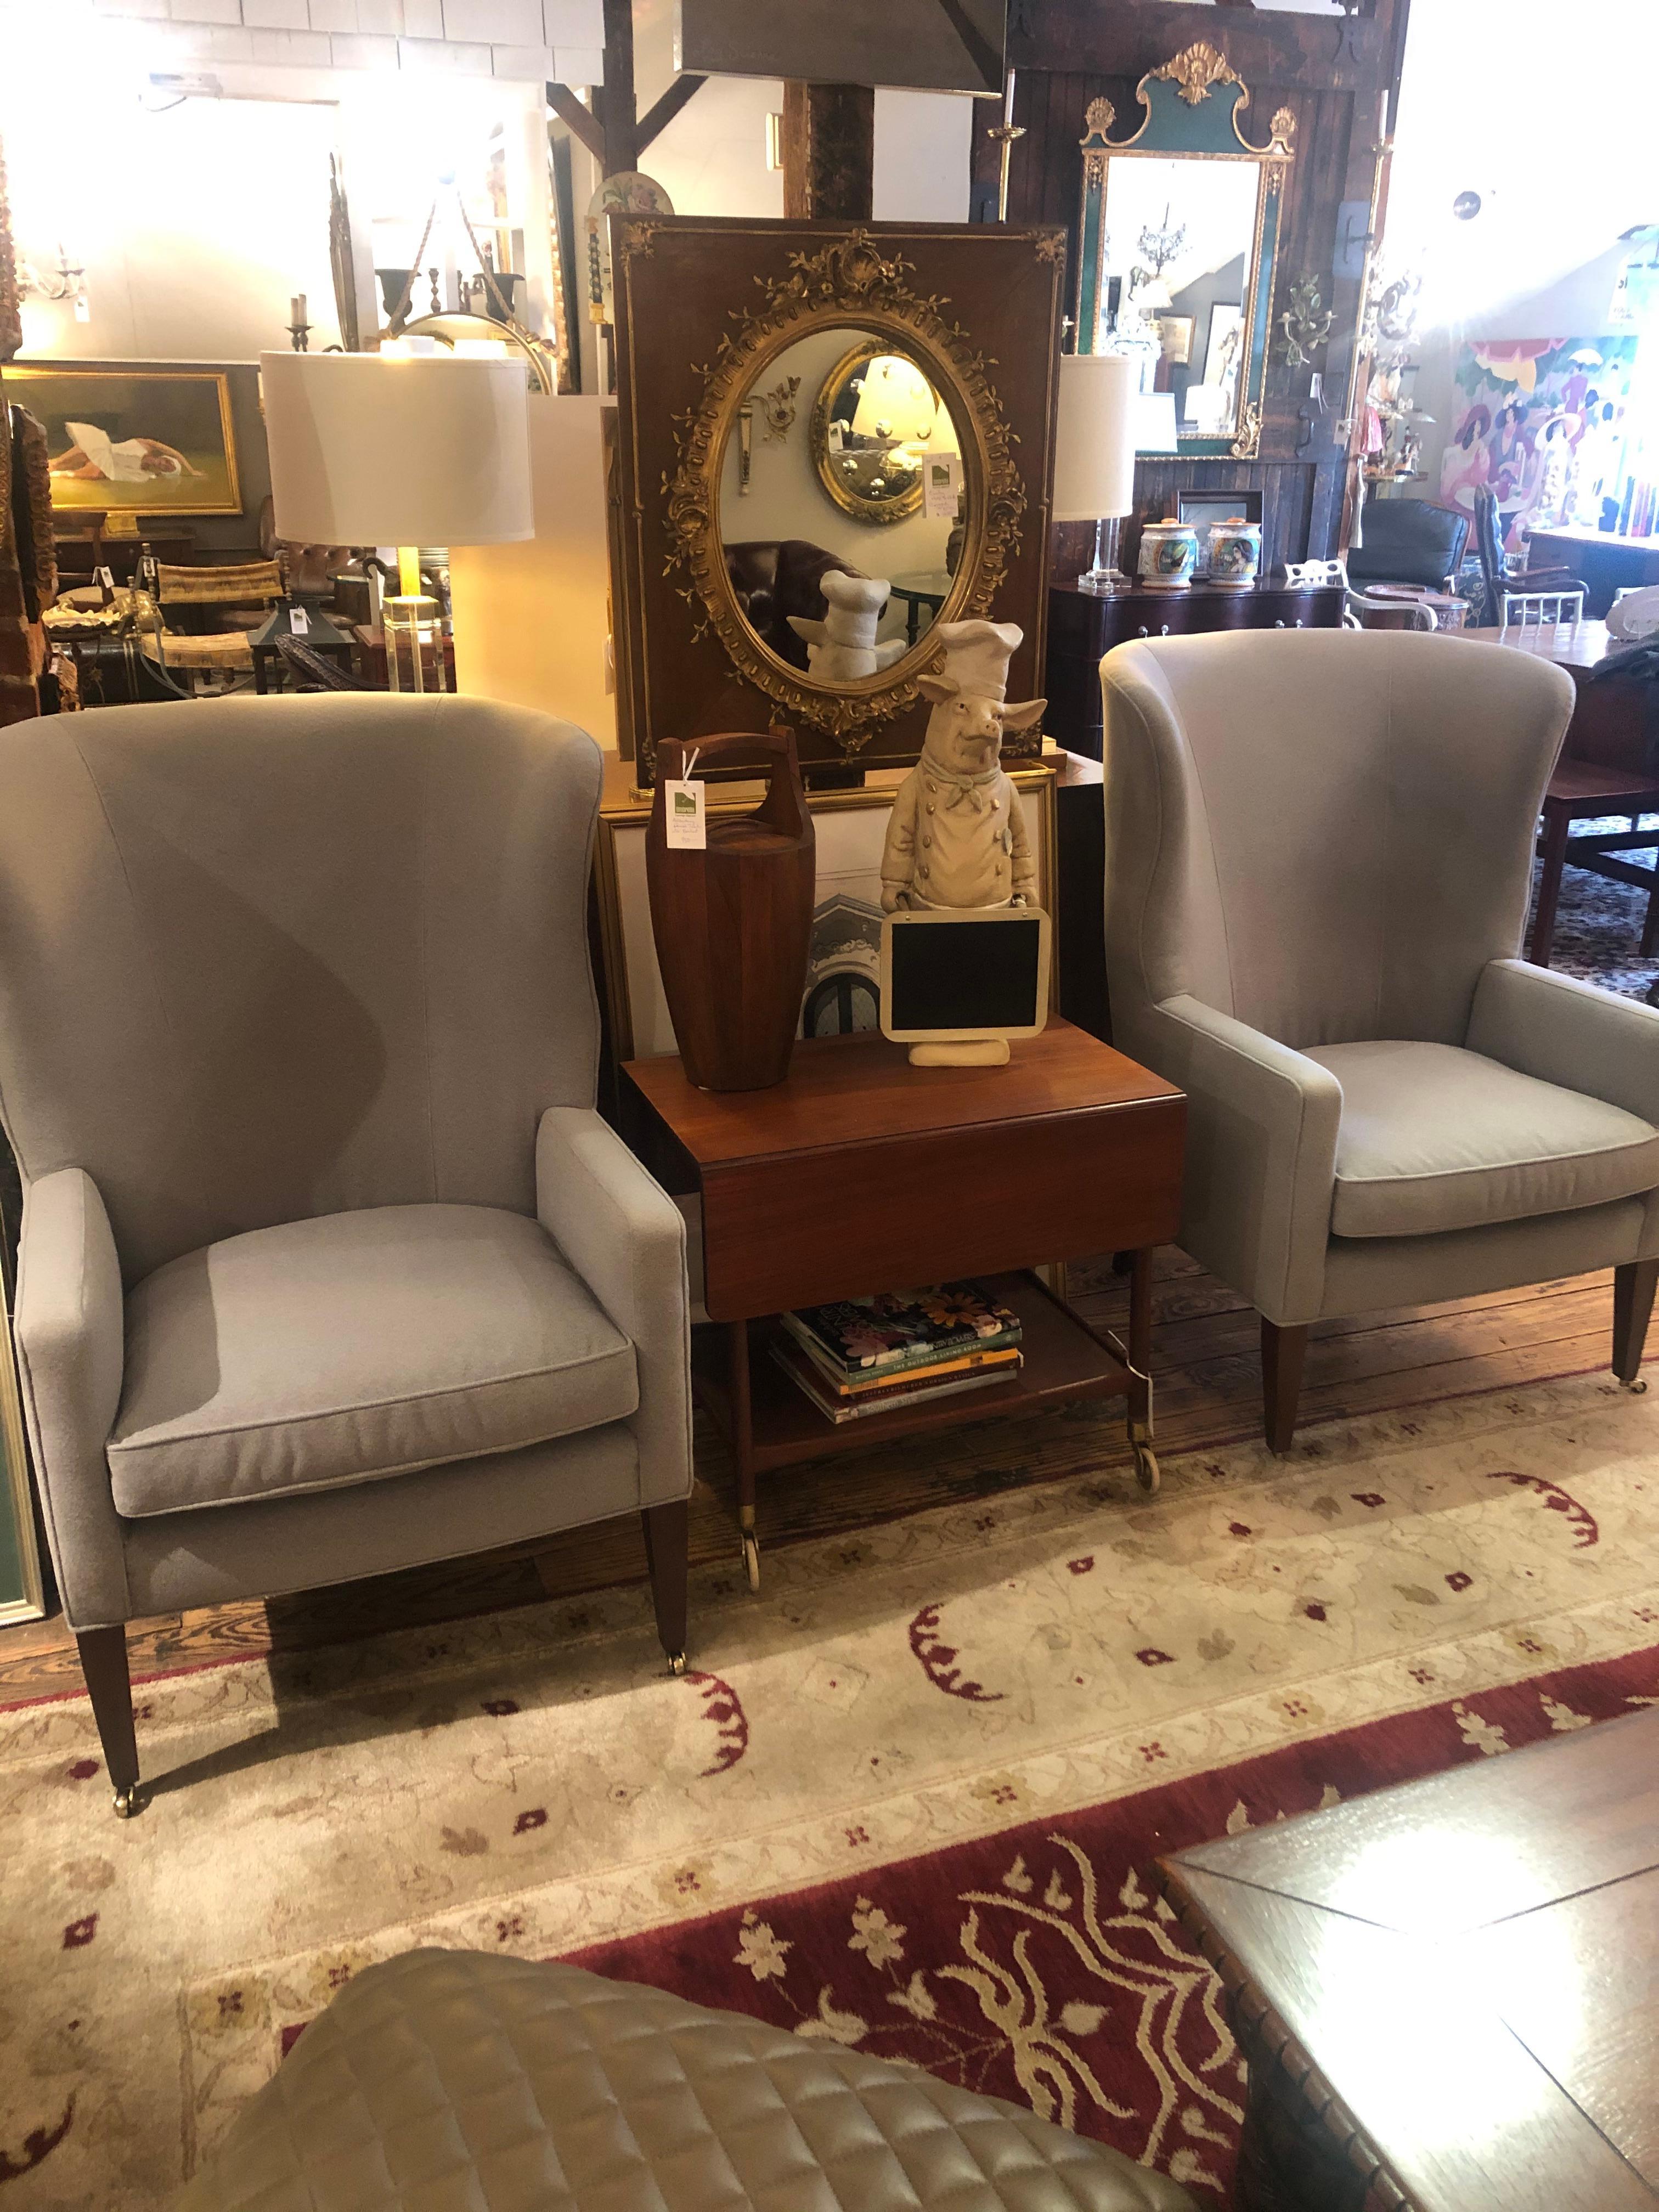 Absolutely sublime pair of barrel back wing chairs newly upholstered in a soft refined grey flannel. The legs are mahogany, the back legs splay out slightly in a lovely shape, and all terminate in brass casters.. Super comfy.